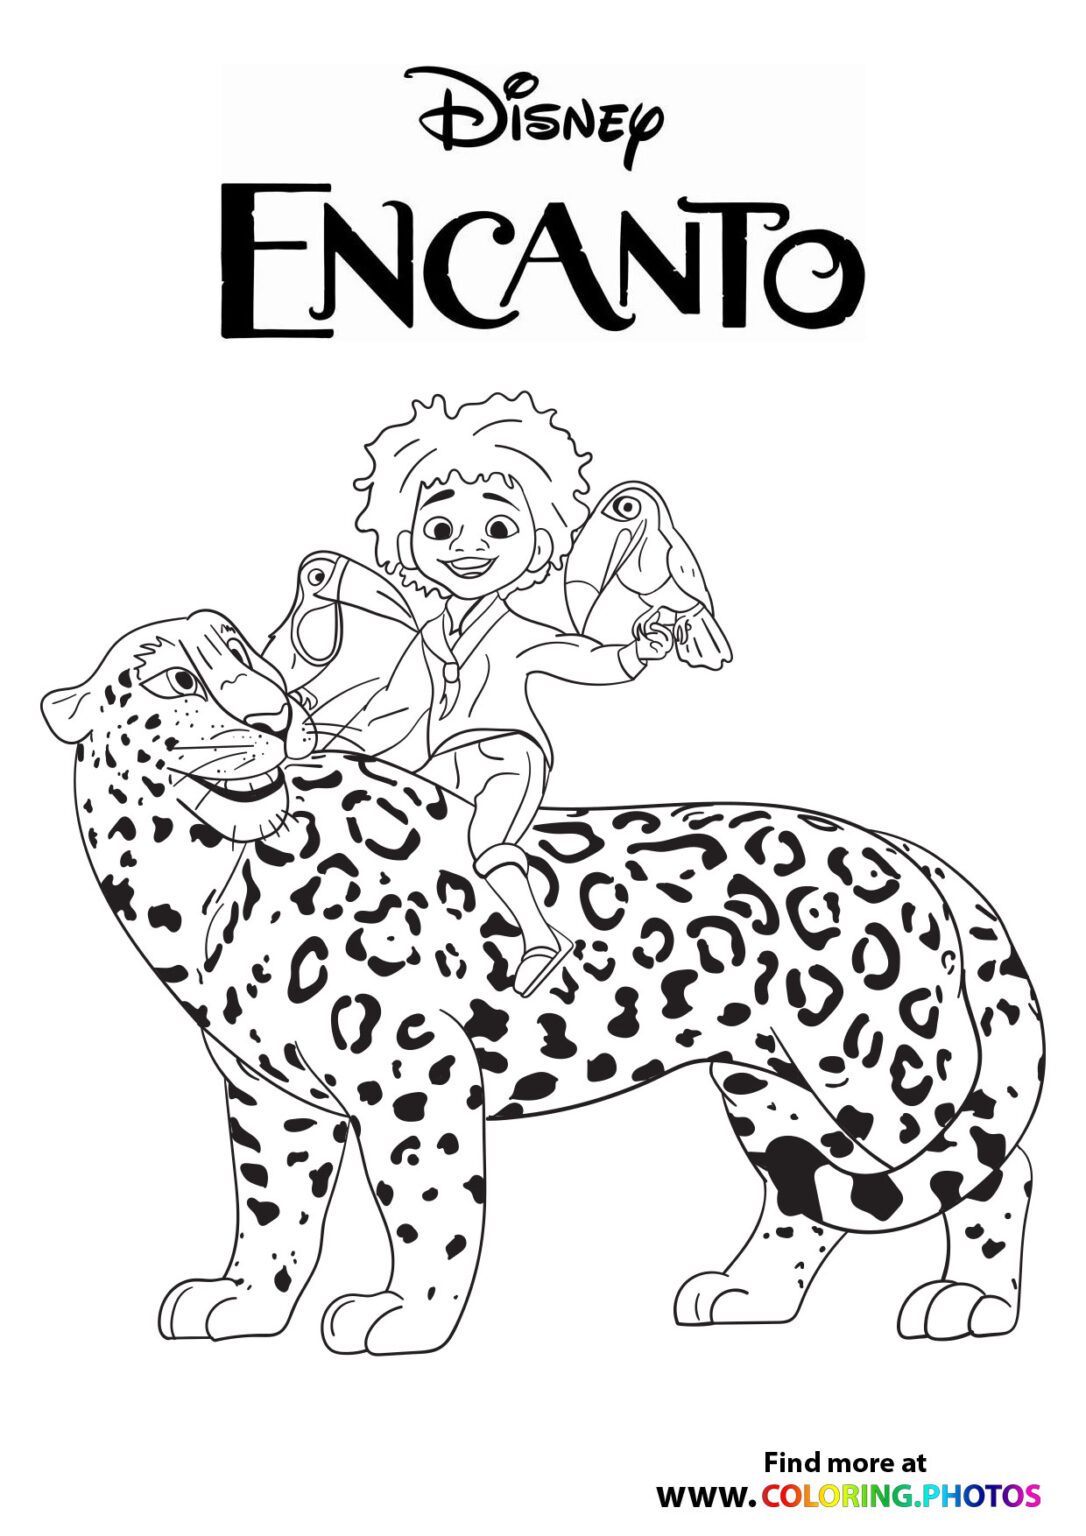 Encanto family with animals Coloring Pages for kids